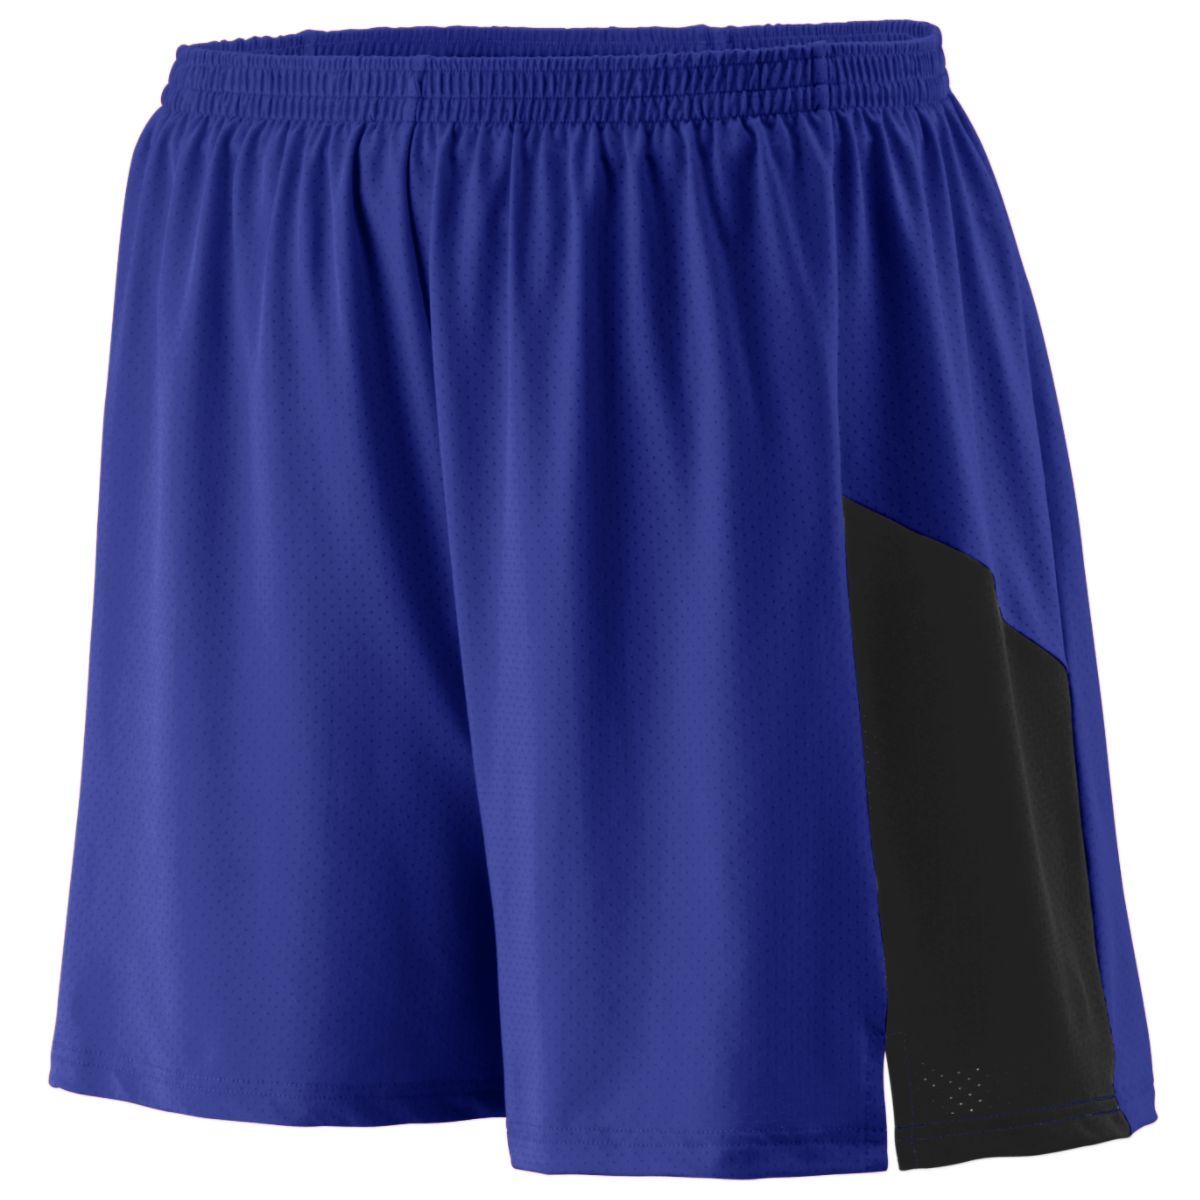 Augusta Sportswear Youth Sprint Shorts in Purple/Black  -Part of the Youth, Youth-Shorts, Augusta-Products, Track-Field product lines at KanaleyCreations.com